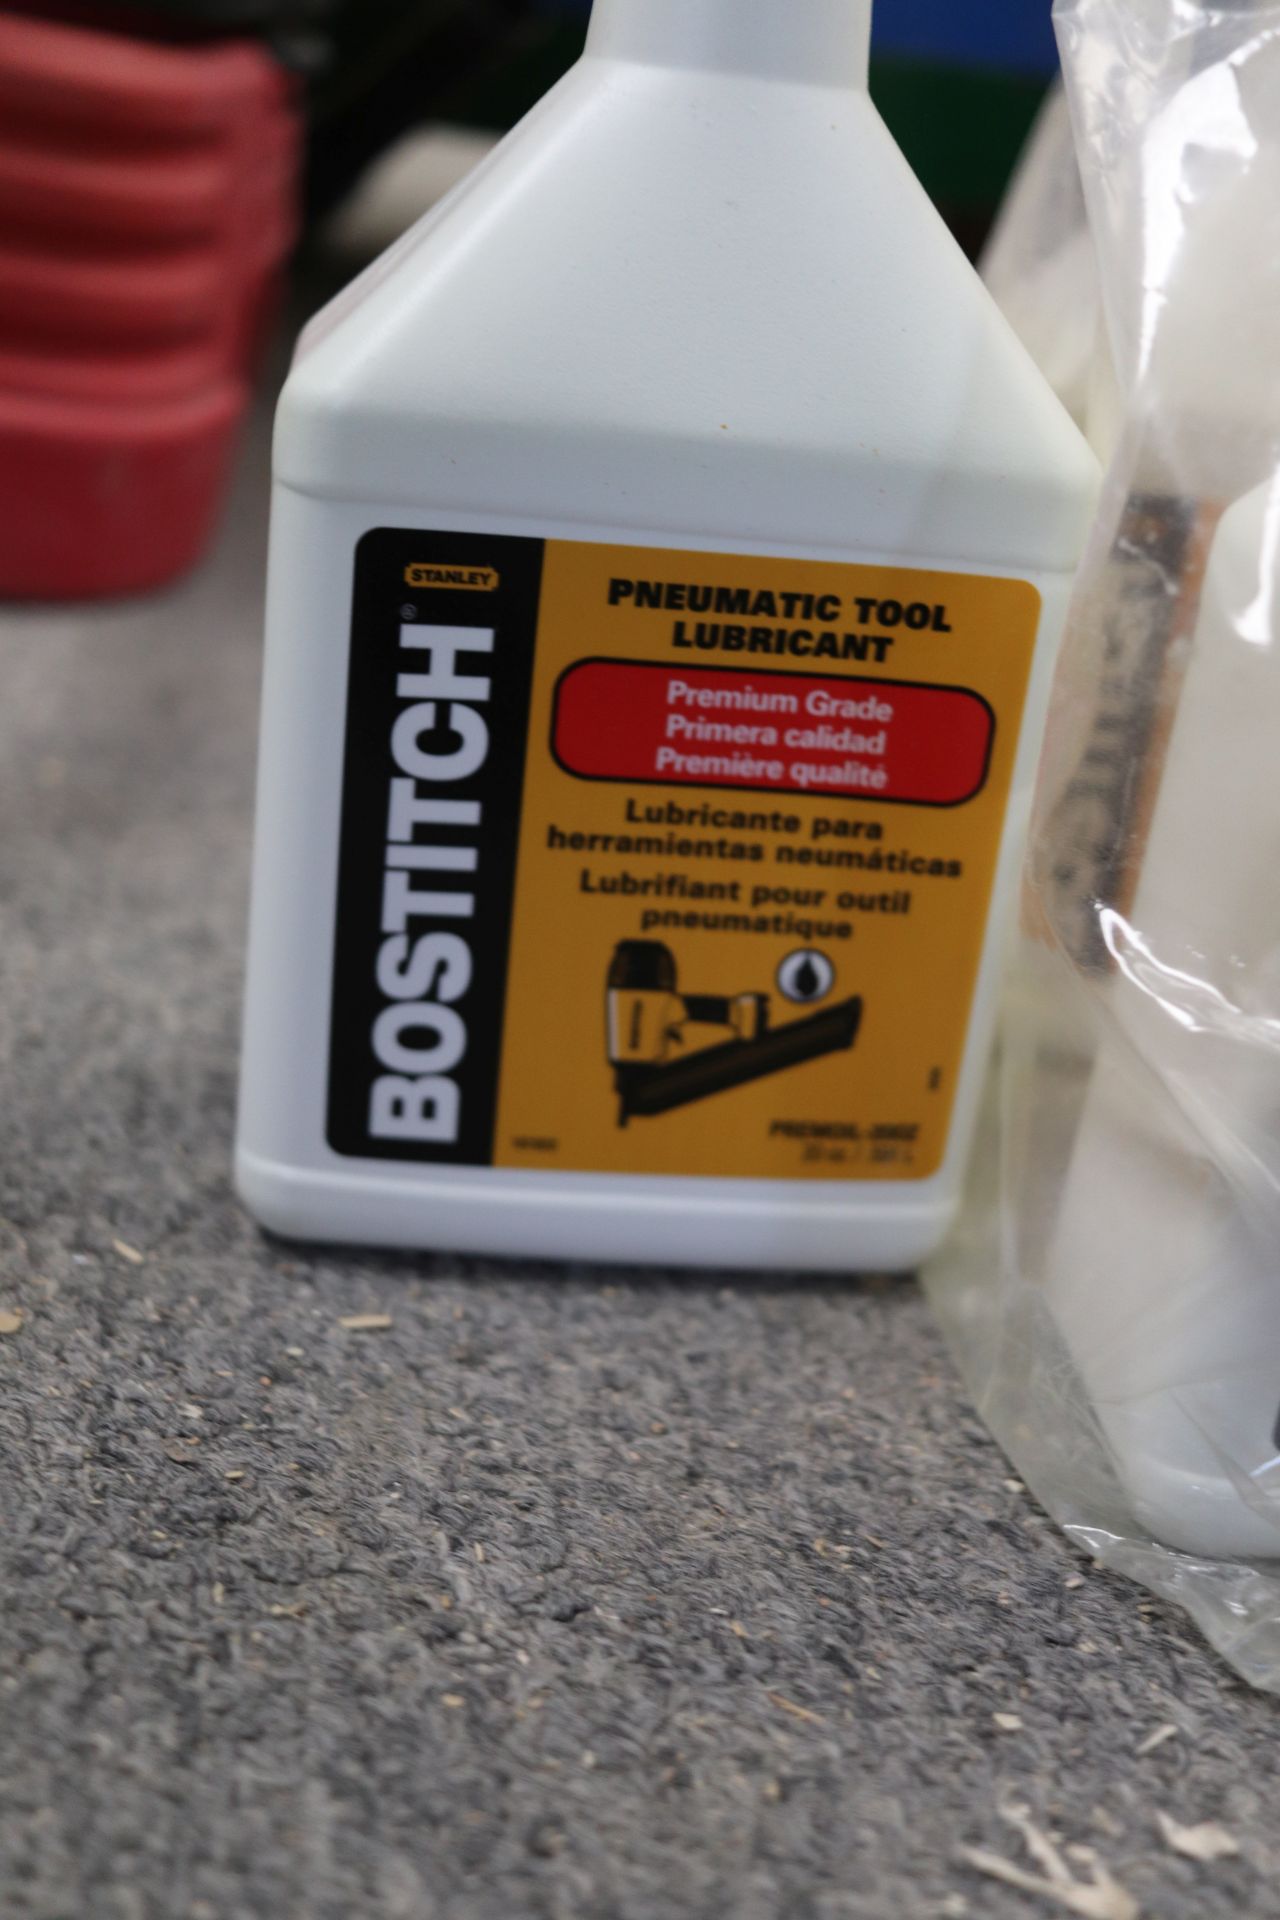 Bostitch pneumatic tool lubricant - Image 2 of 2